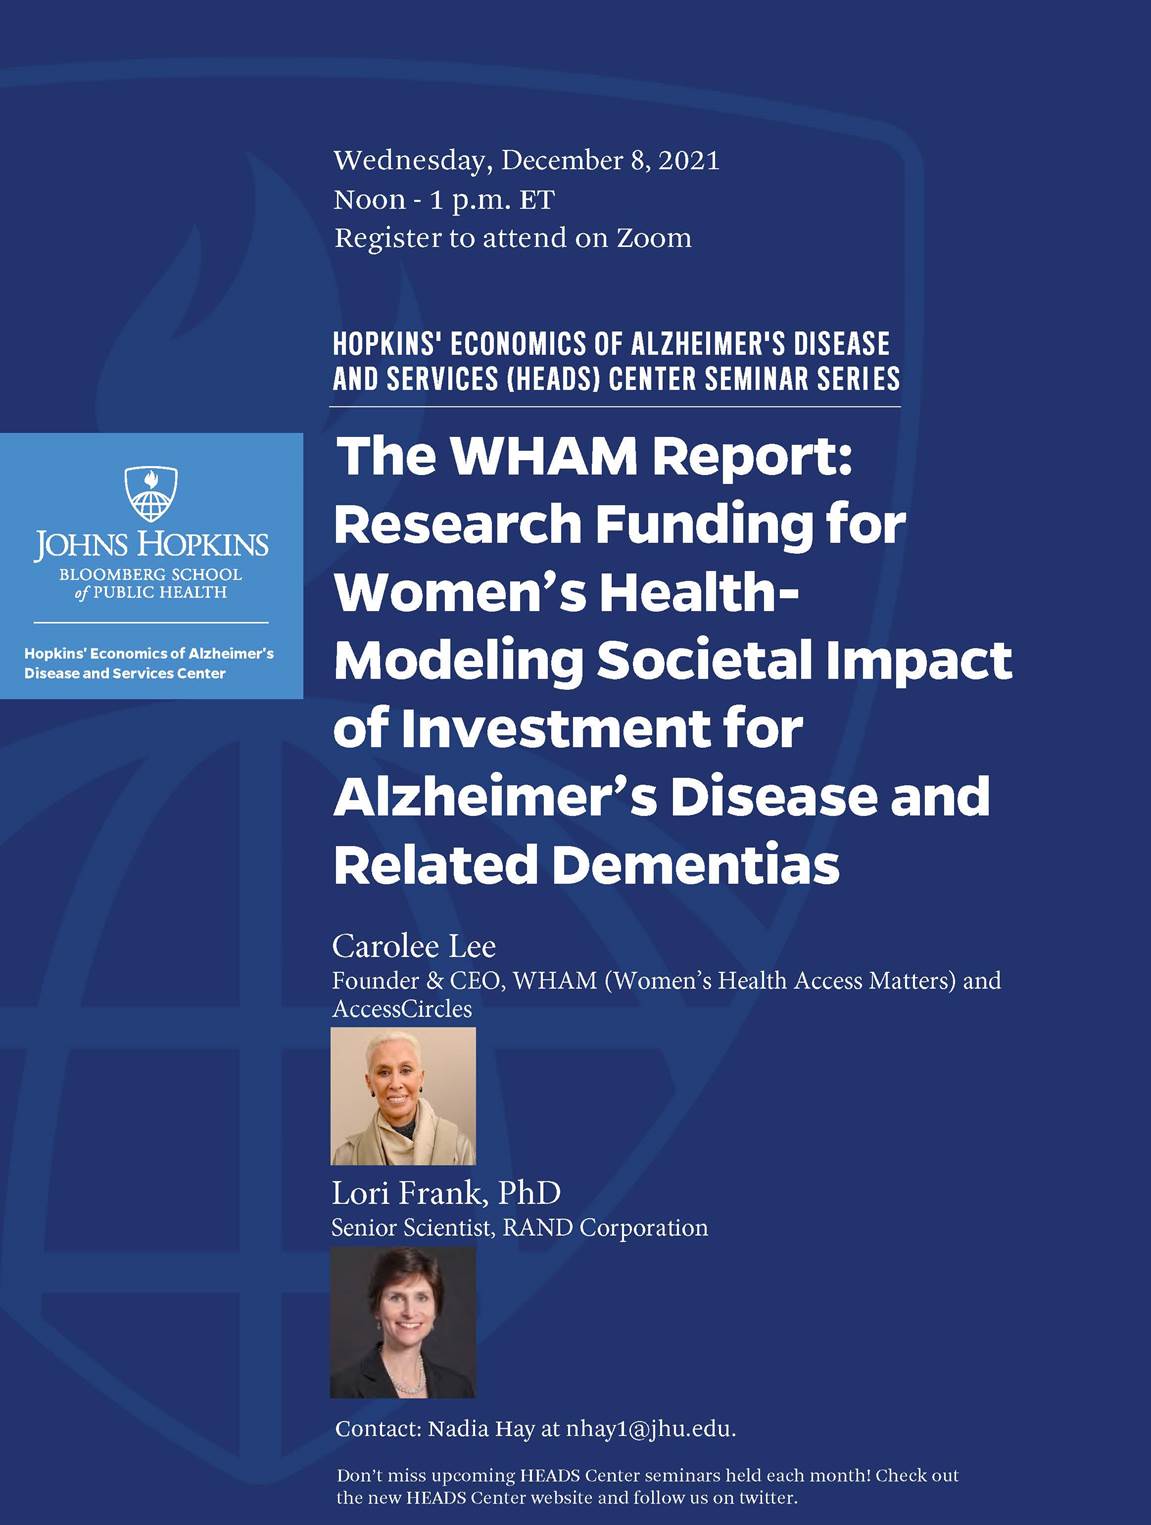 poster for Carolee Lee and Lori Frank's seminar: “The WHAM Report: Research Funding for Women’s Health- Modeling Societal Impact of Investment for Alzheimer’s Disease and Related Dementias”